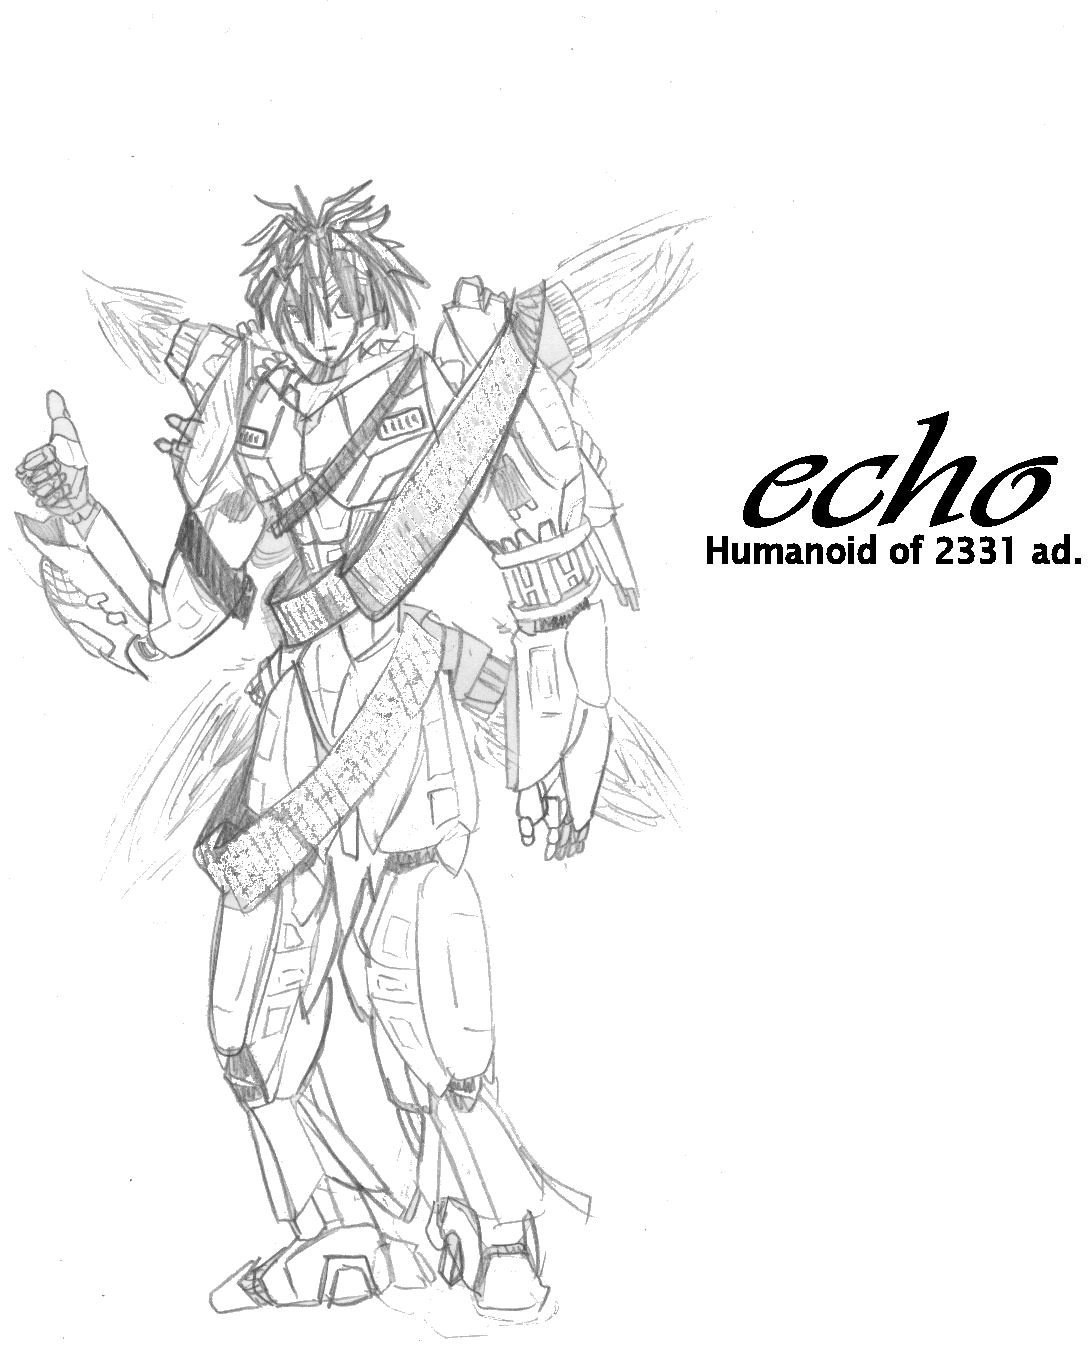 Echo the Humanoid by Cloud36